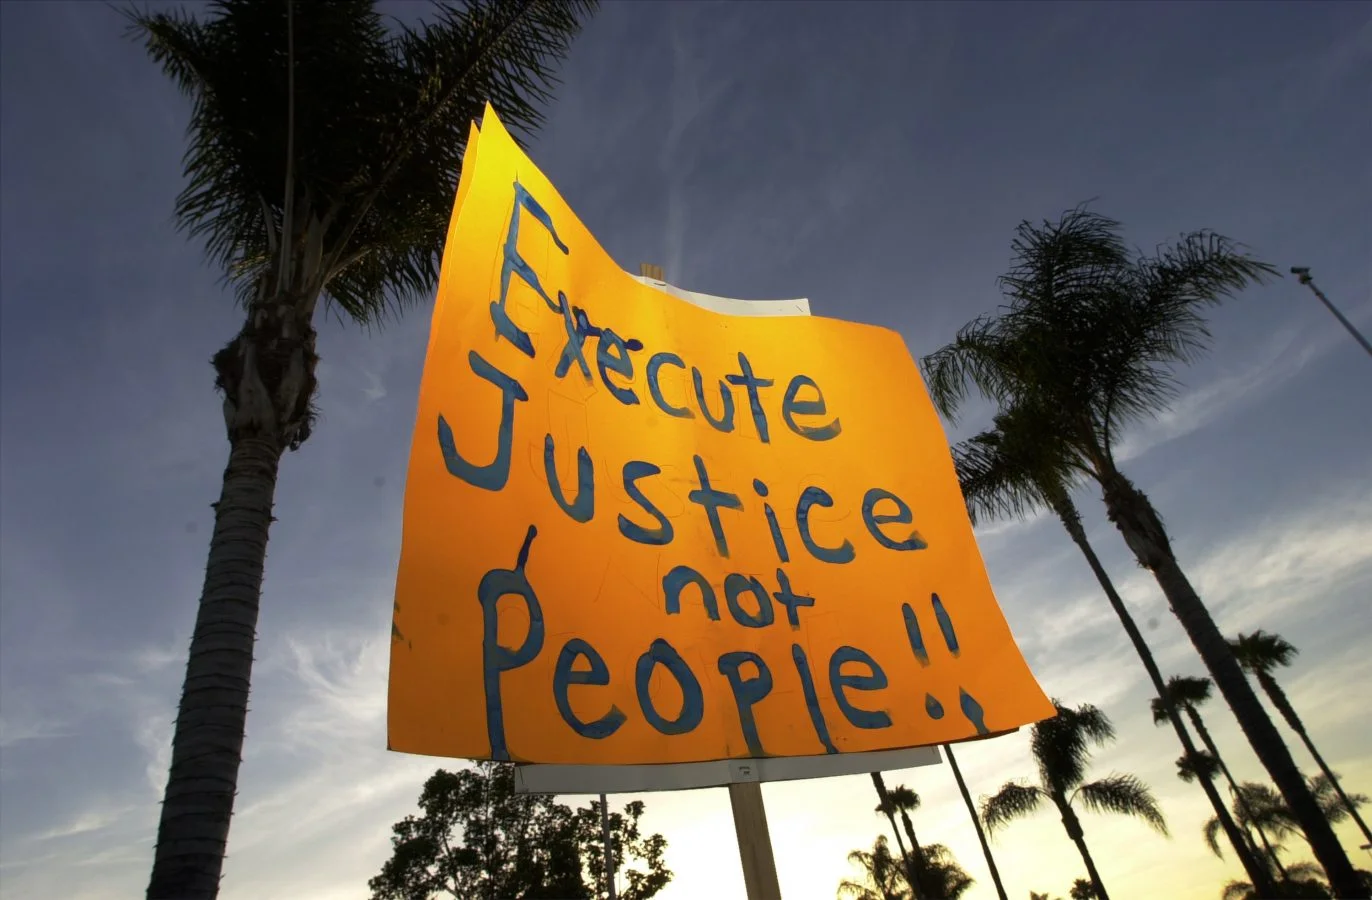 A protester holds a sign up against a backdrop of palm trees which reads 'execute justice not people' during an anti-death penalty protest.